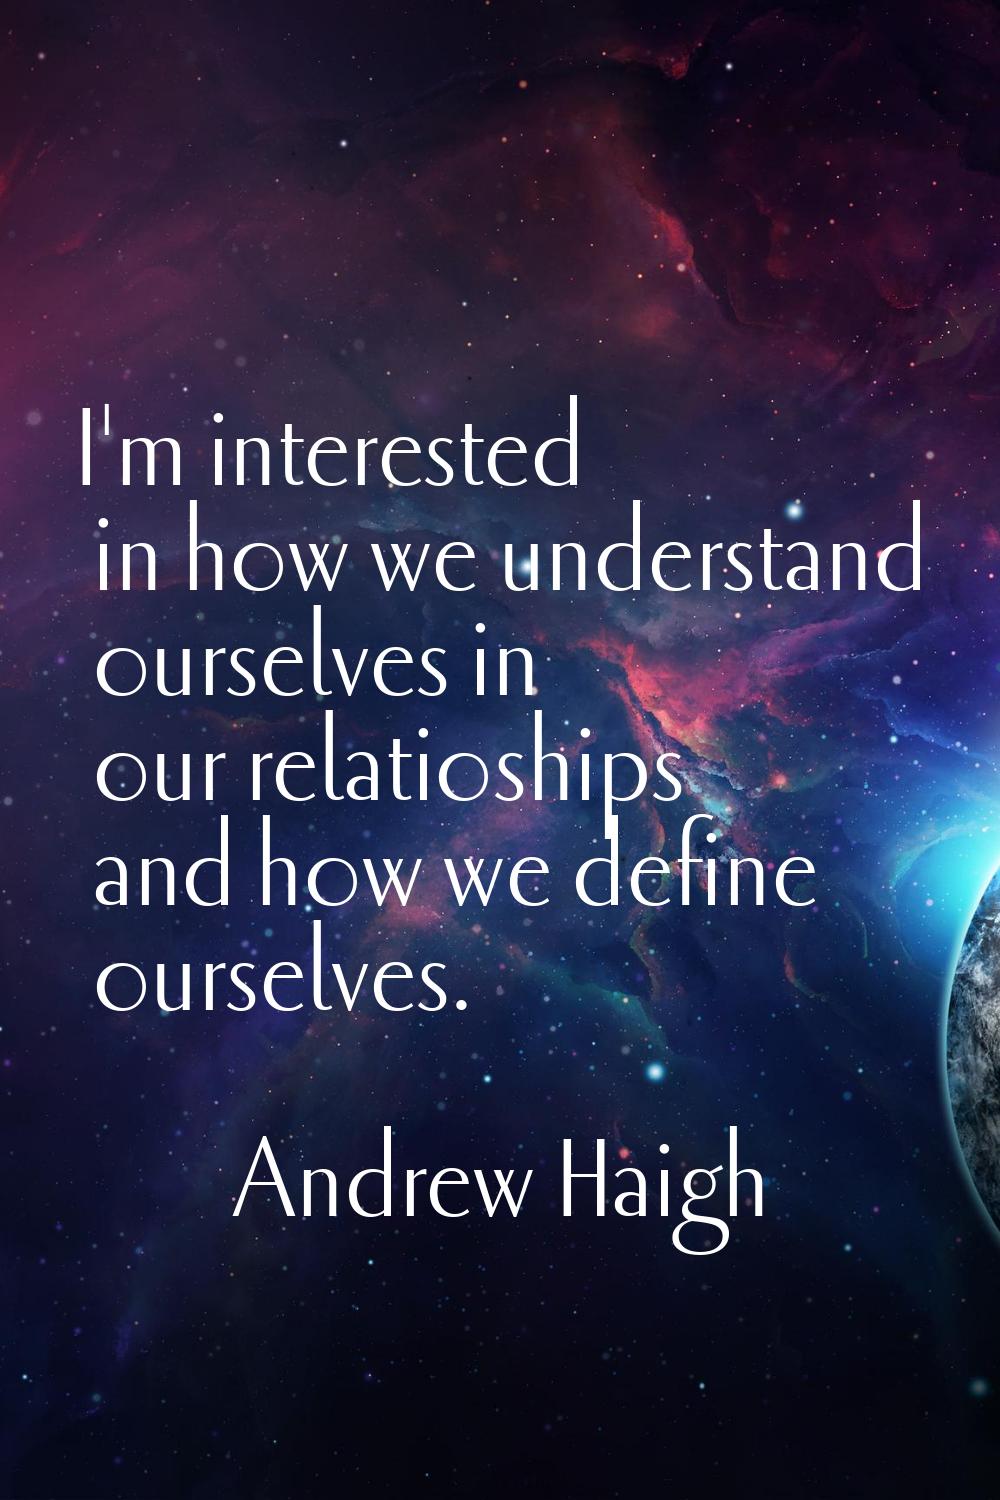 I'm interested in how we understand ourselves in our relatioships and how we define ourselves.